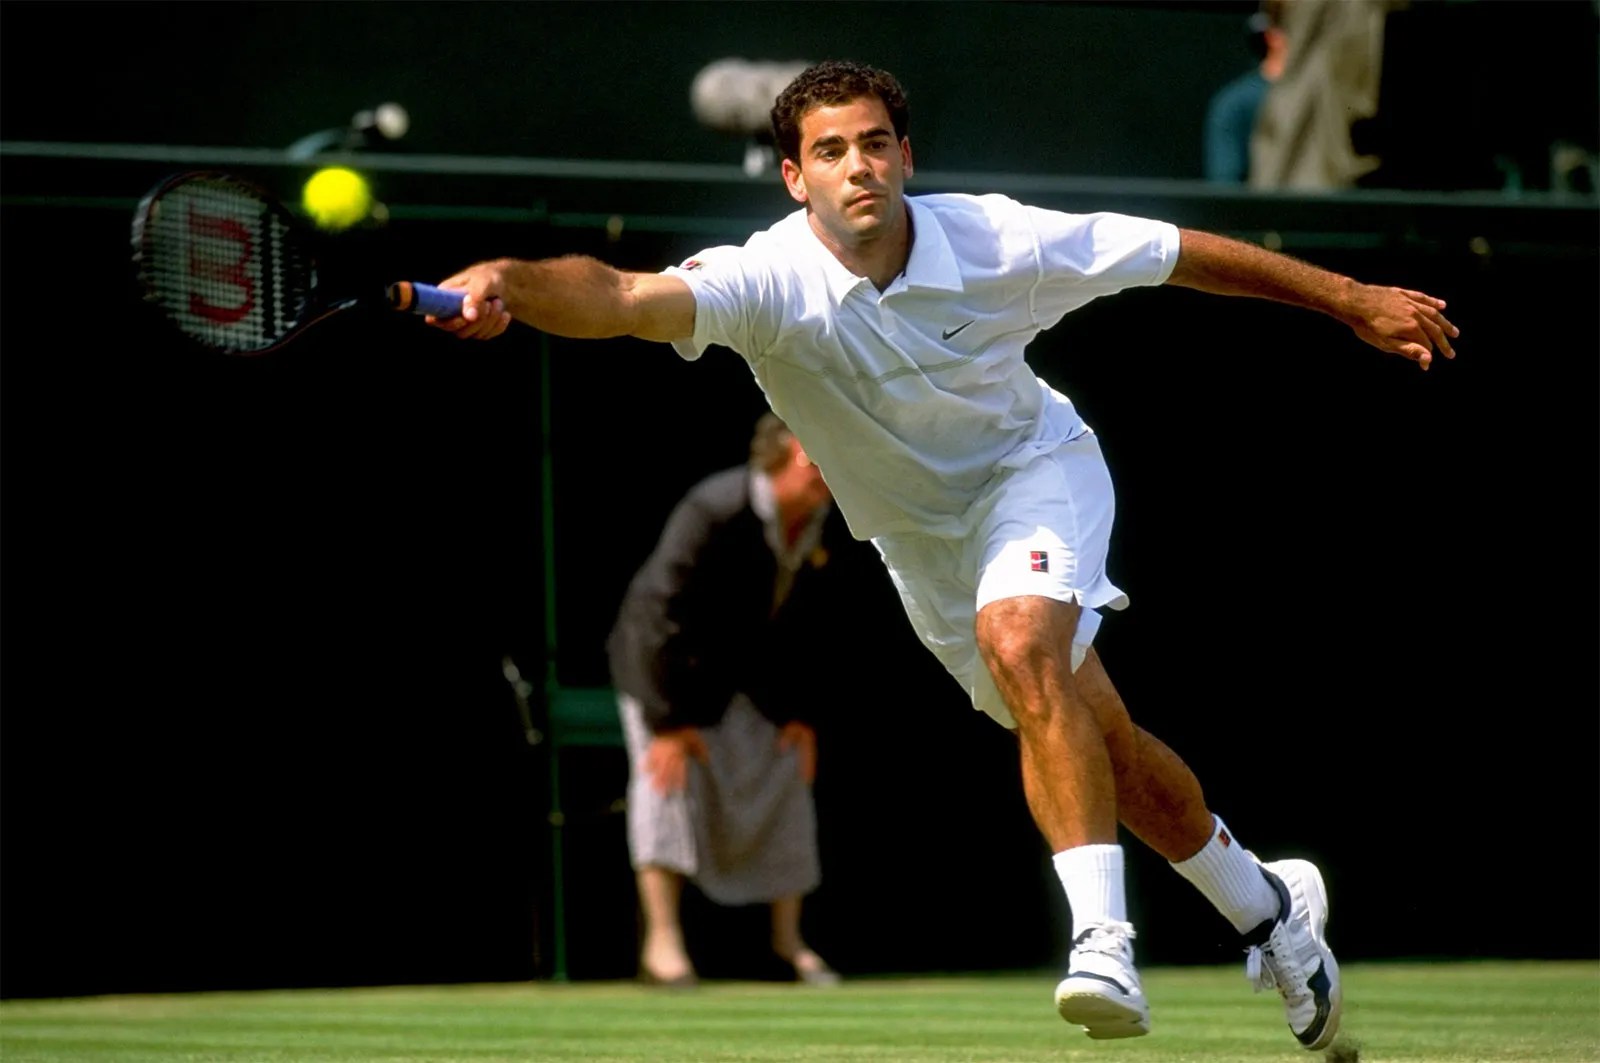 Wimbledon 2022: From Roger Federer to Bjorn Borg, Most Successful Men's singles champions at Wimbledon - Check Out 